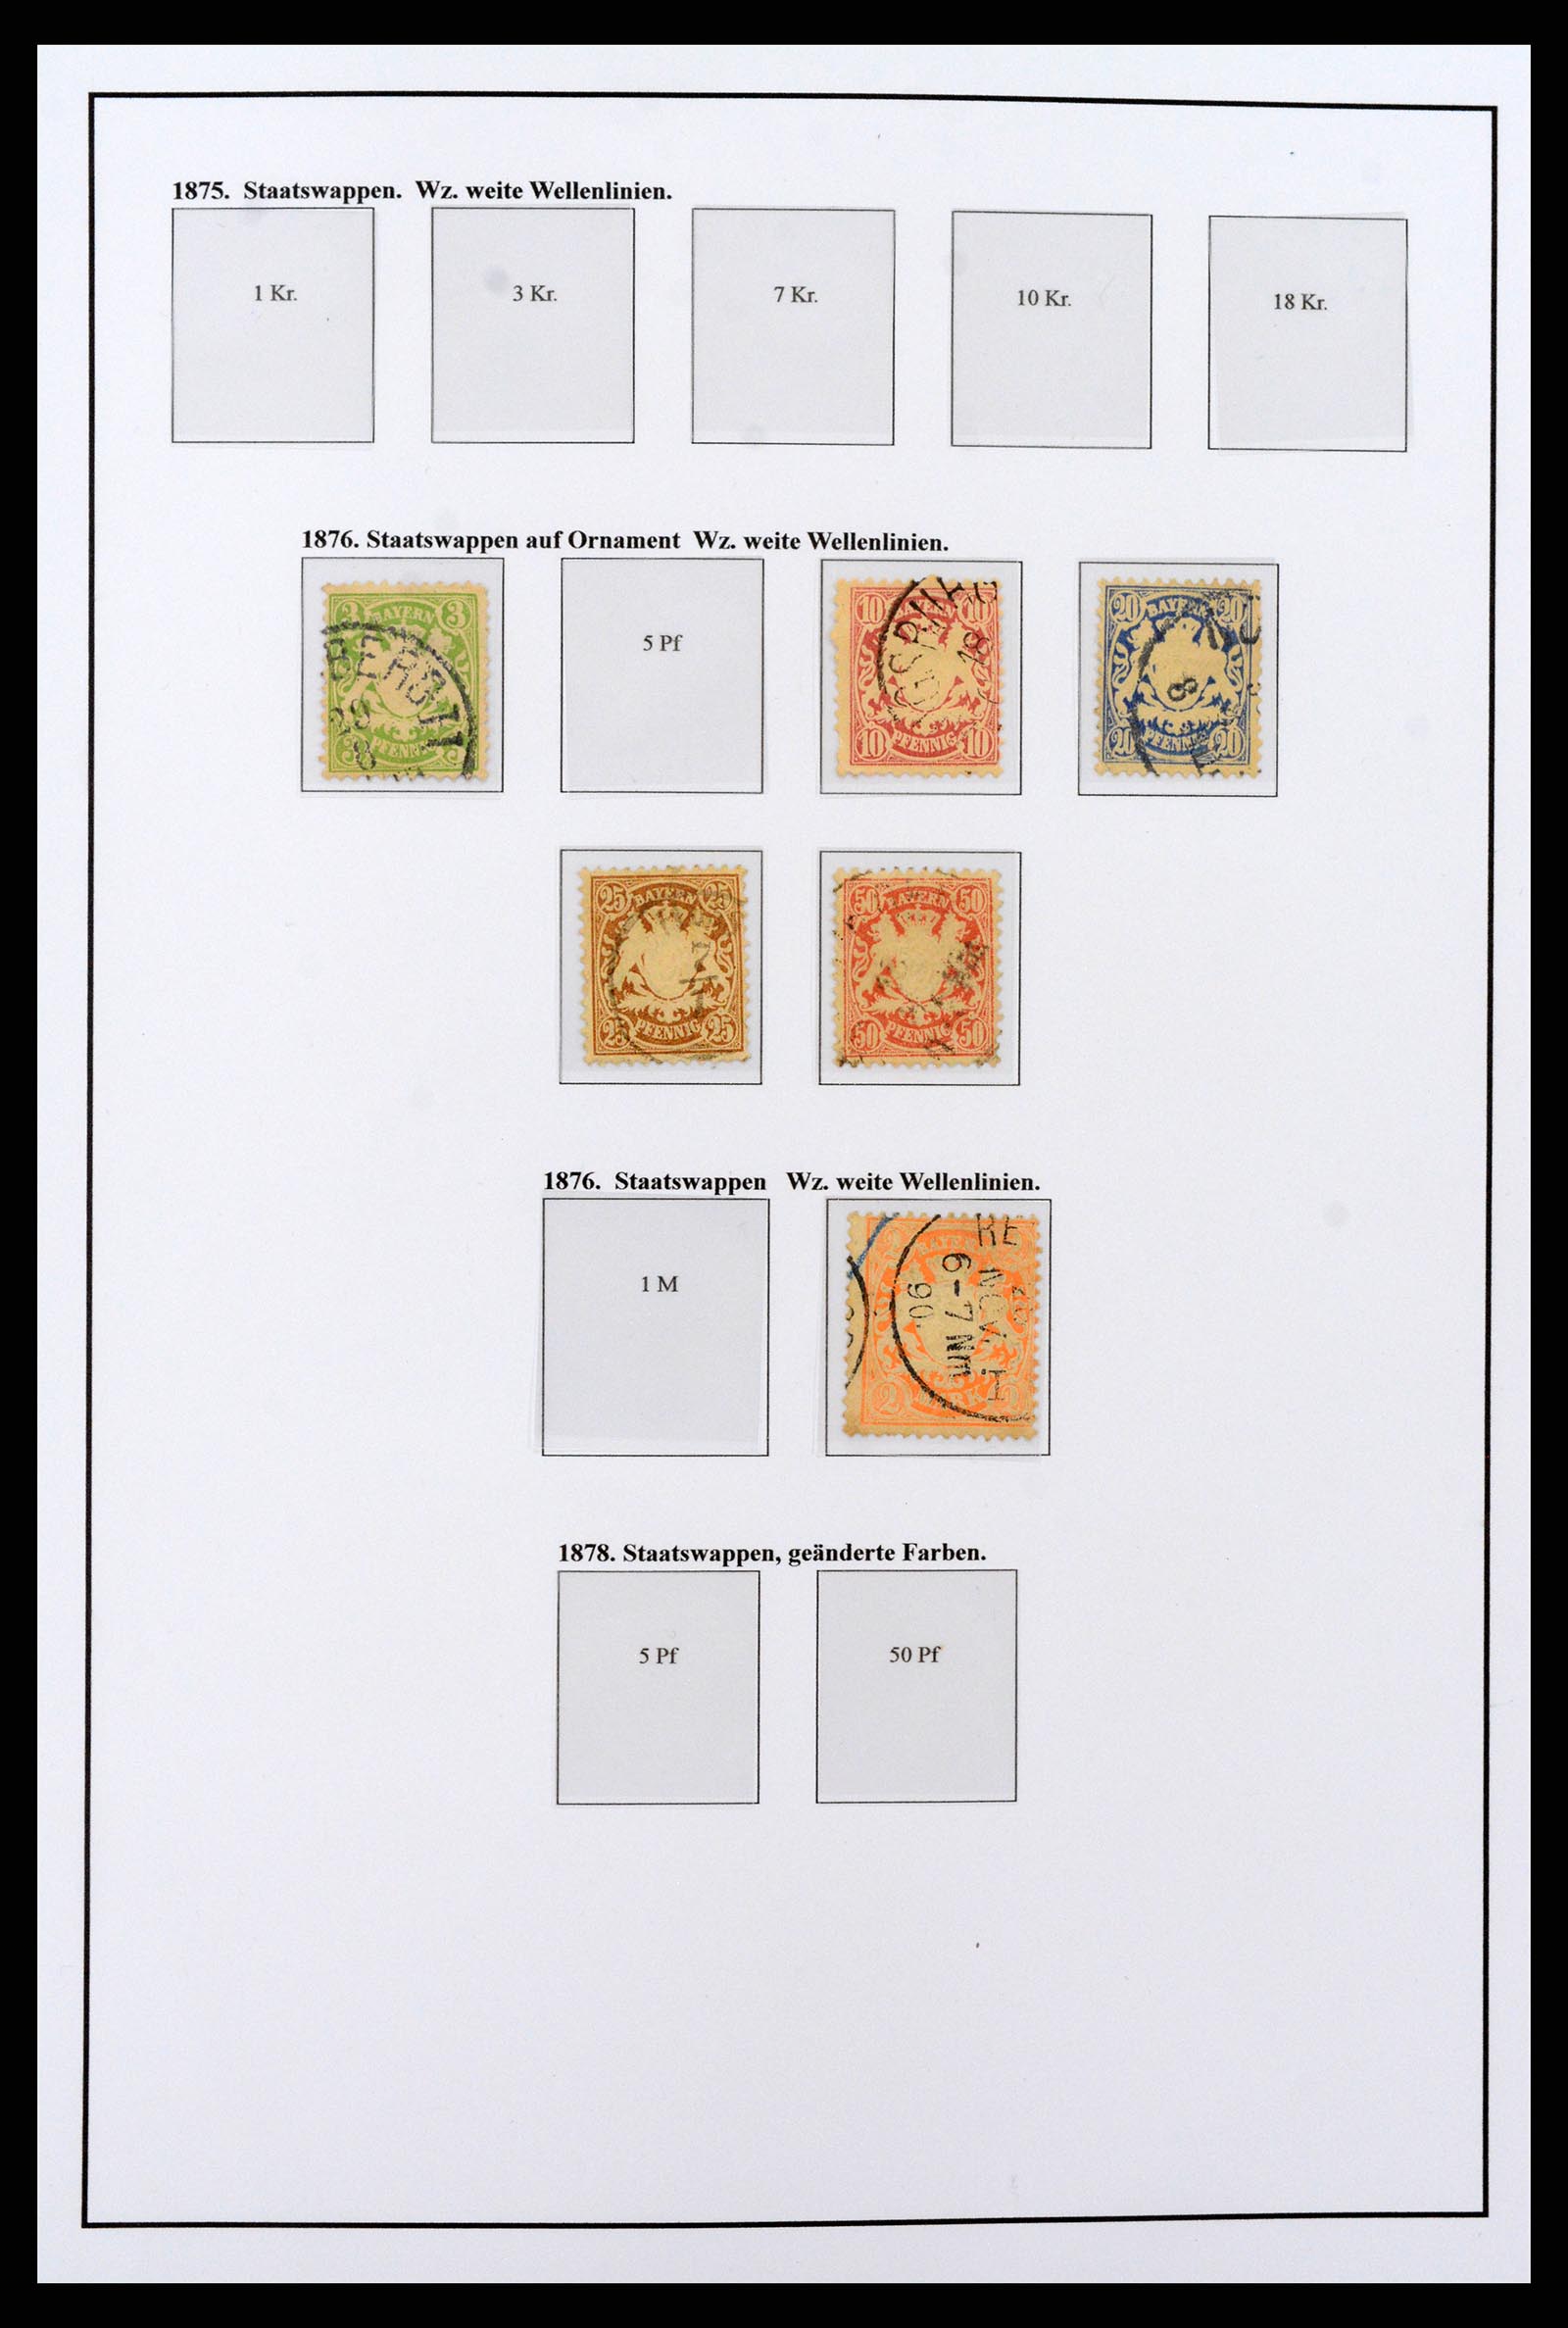 37235 008 - Stamp collection 37235 Germany 1872-1990.